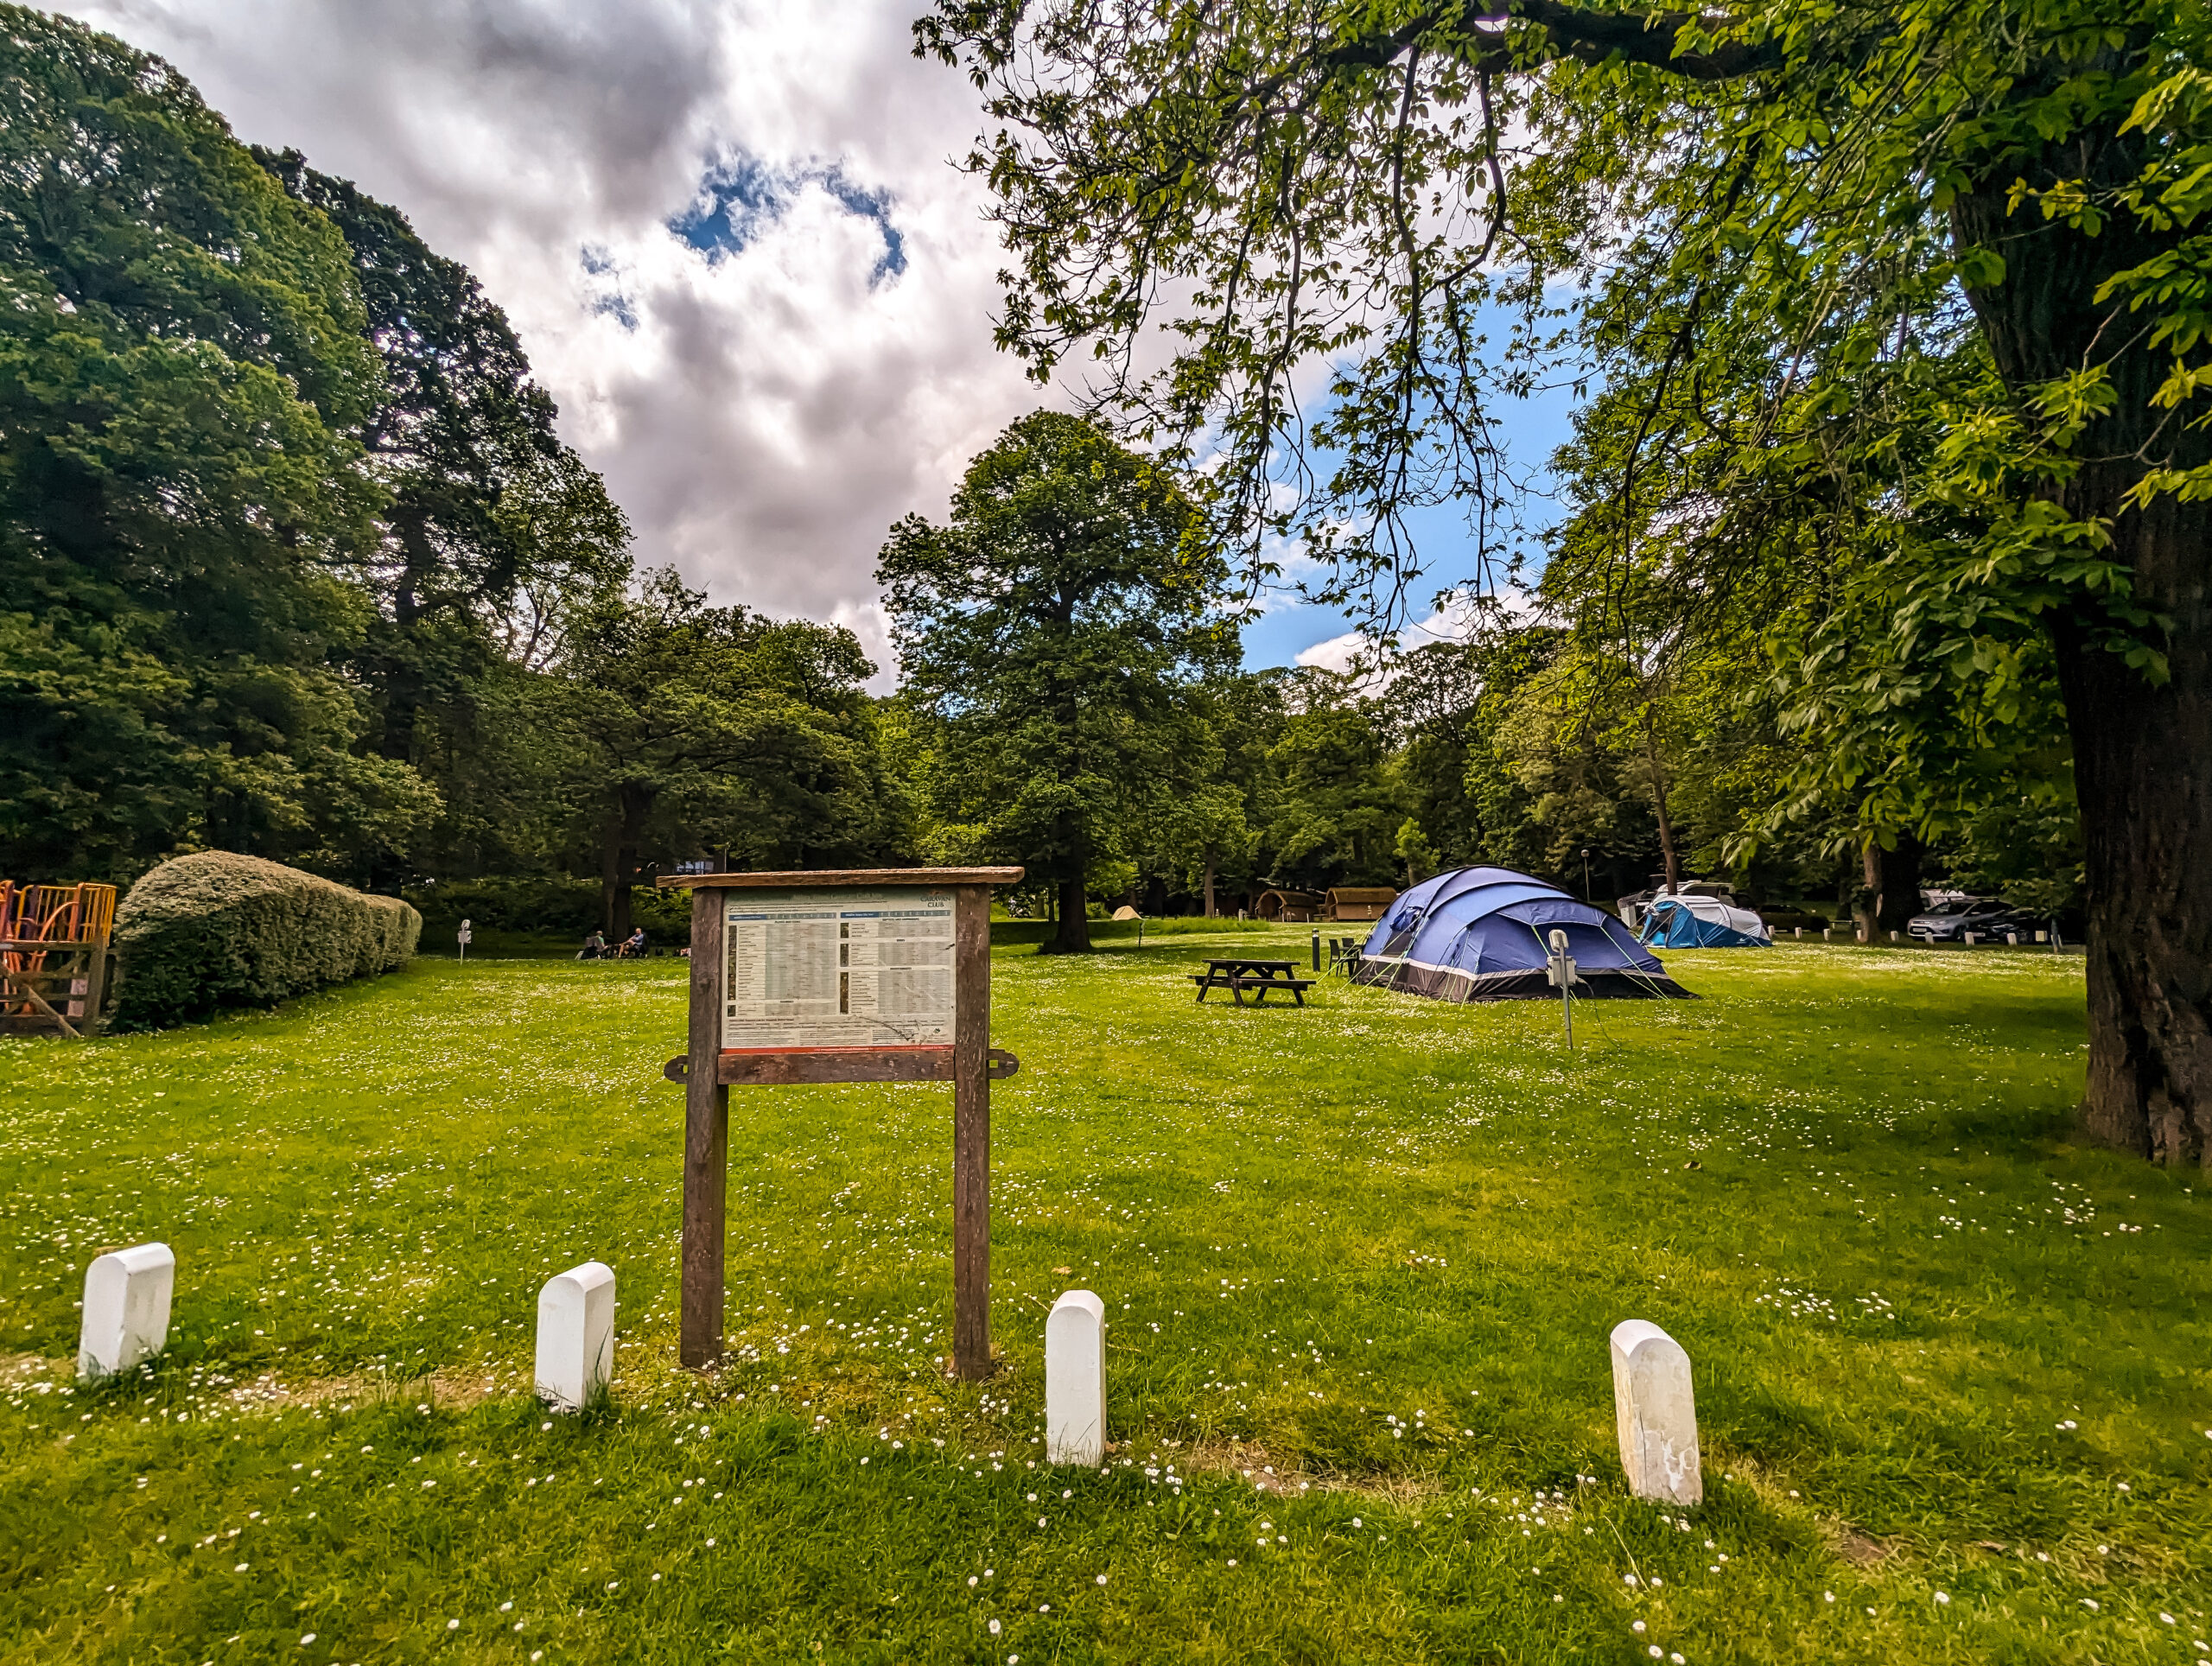 The camping area of the Abbey Wood Campsite in London